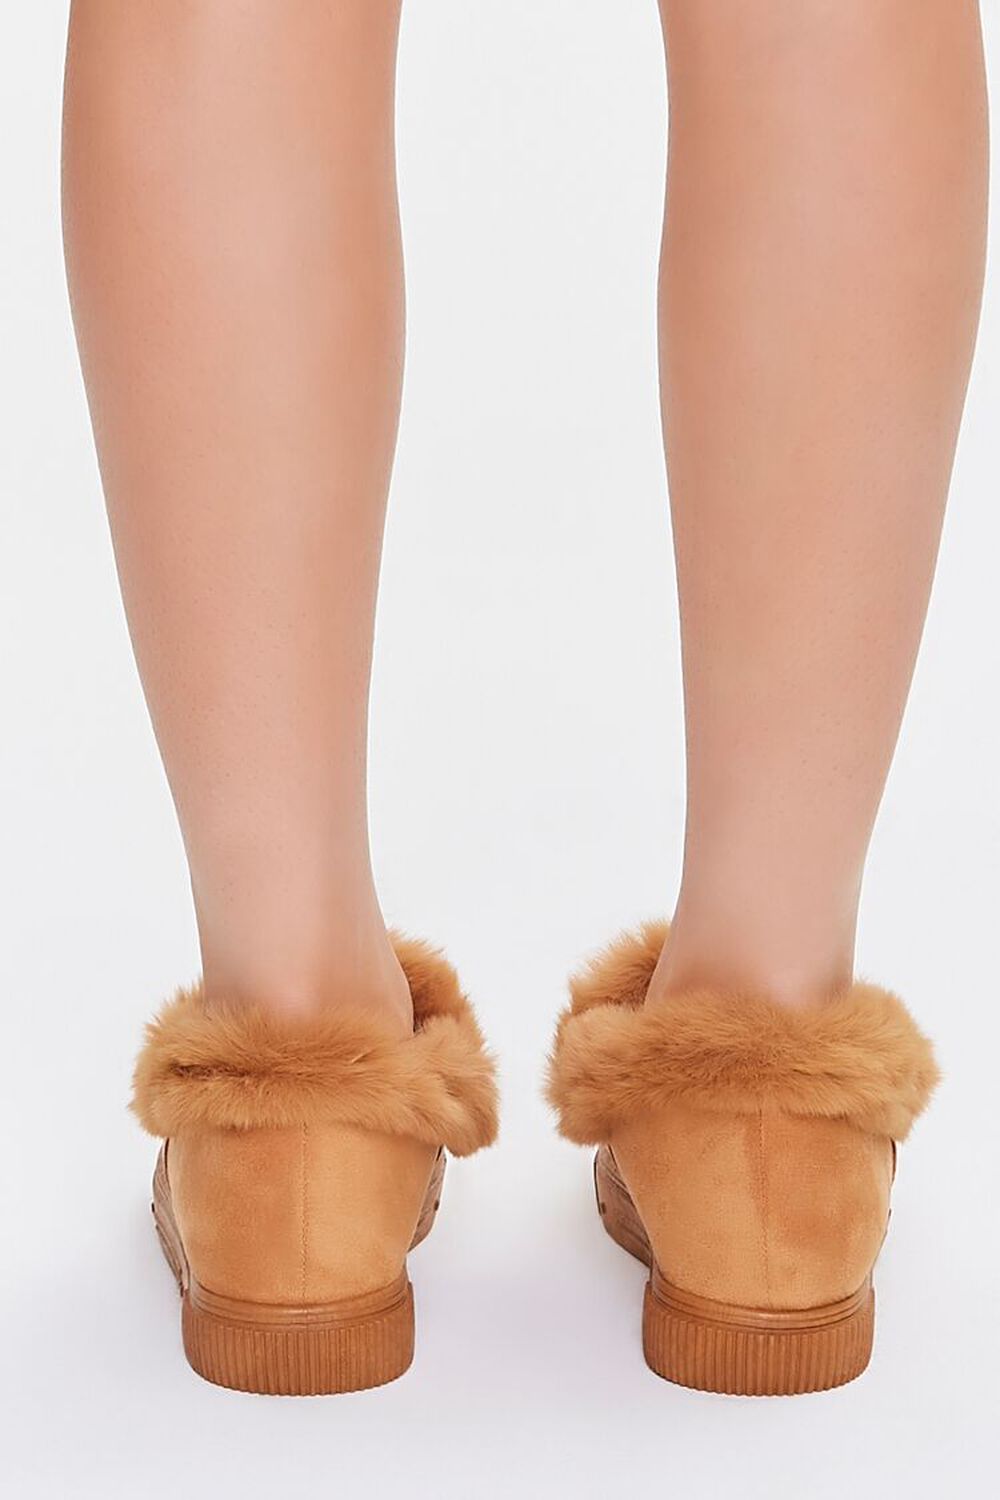 TAN Faux Suede Bow Loafers, image 3